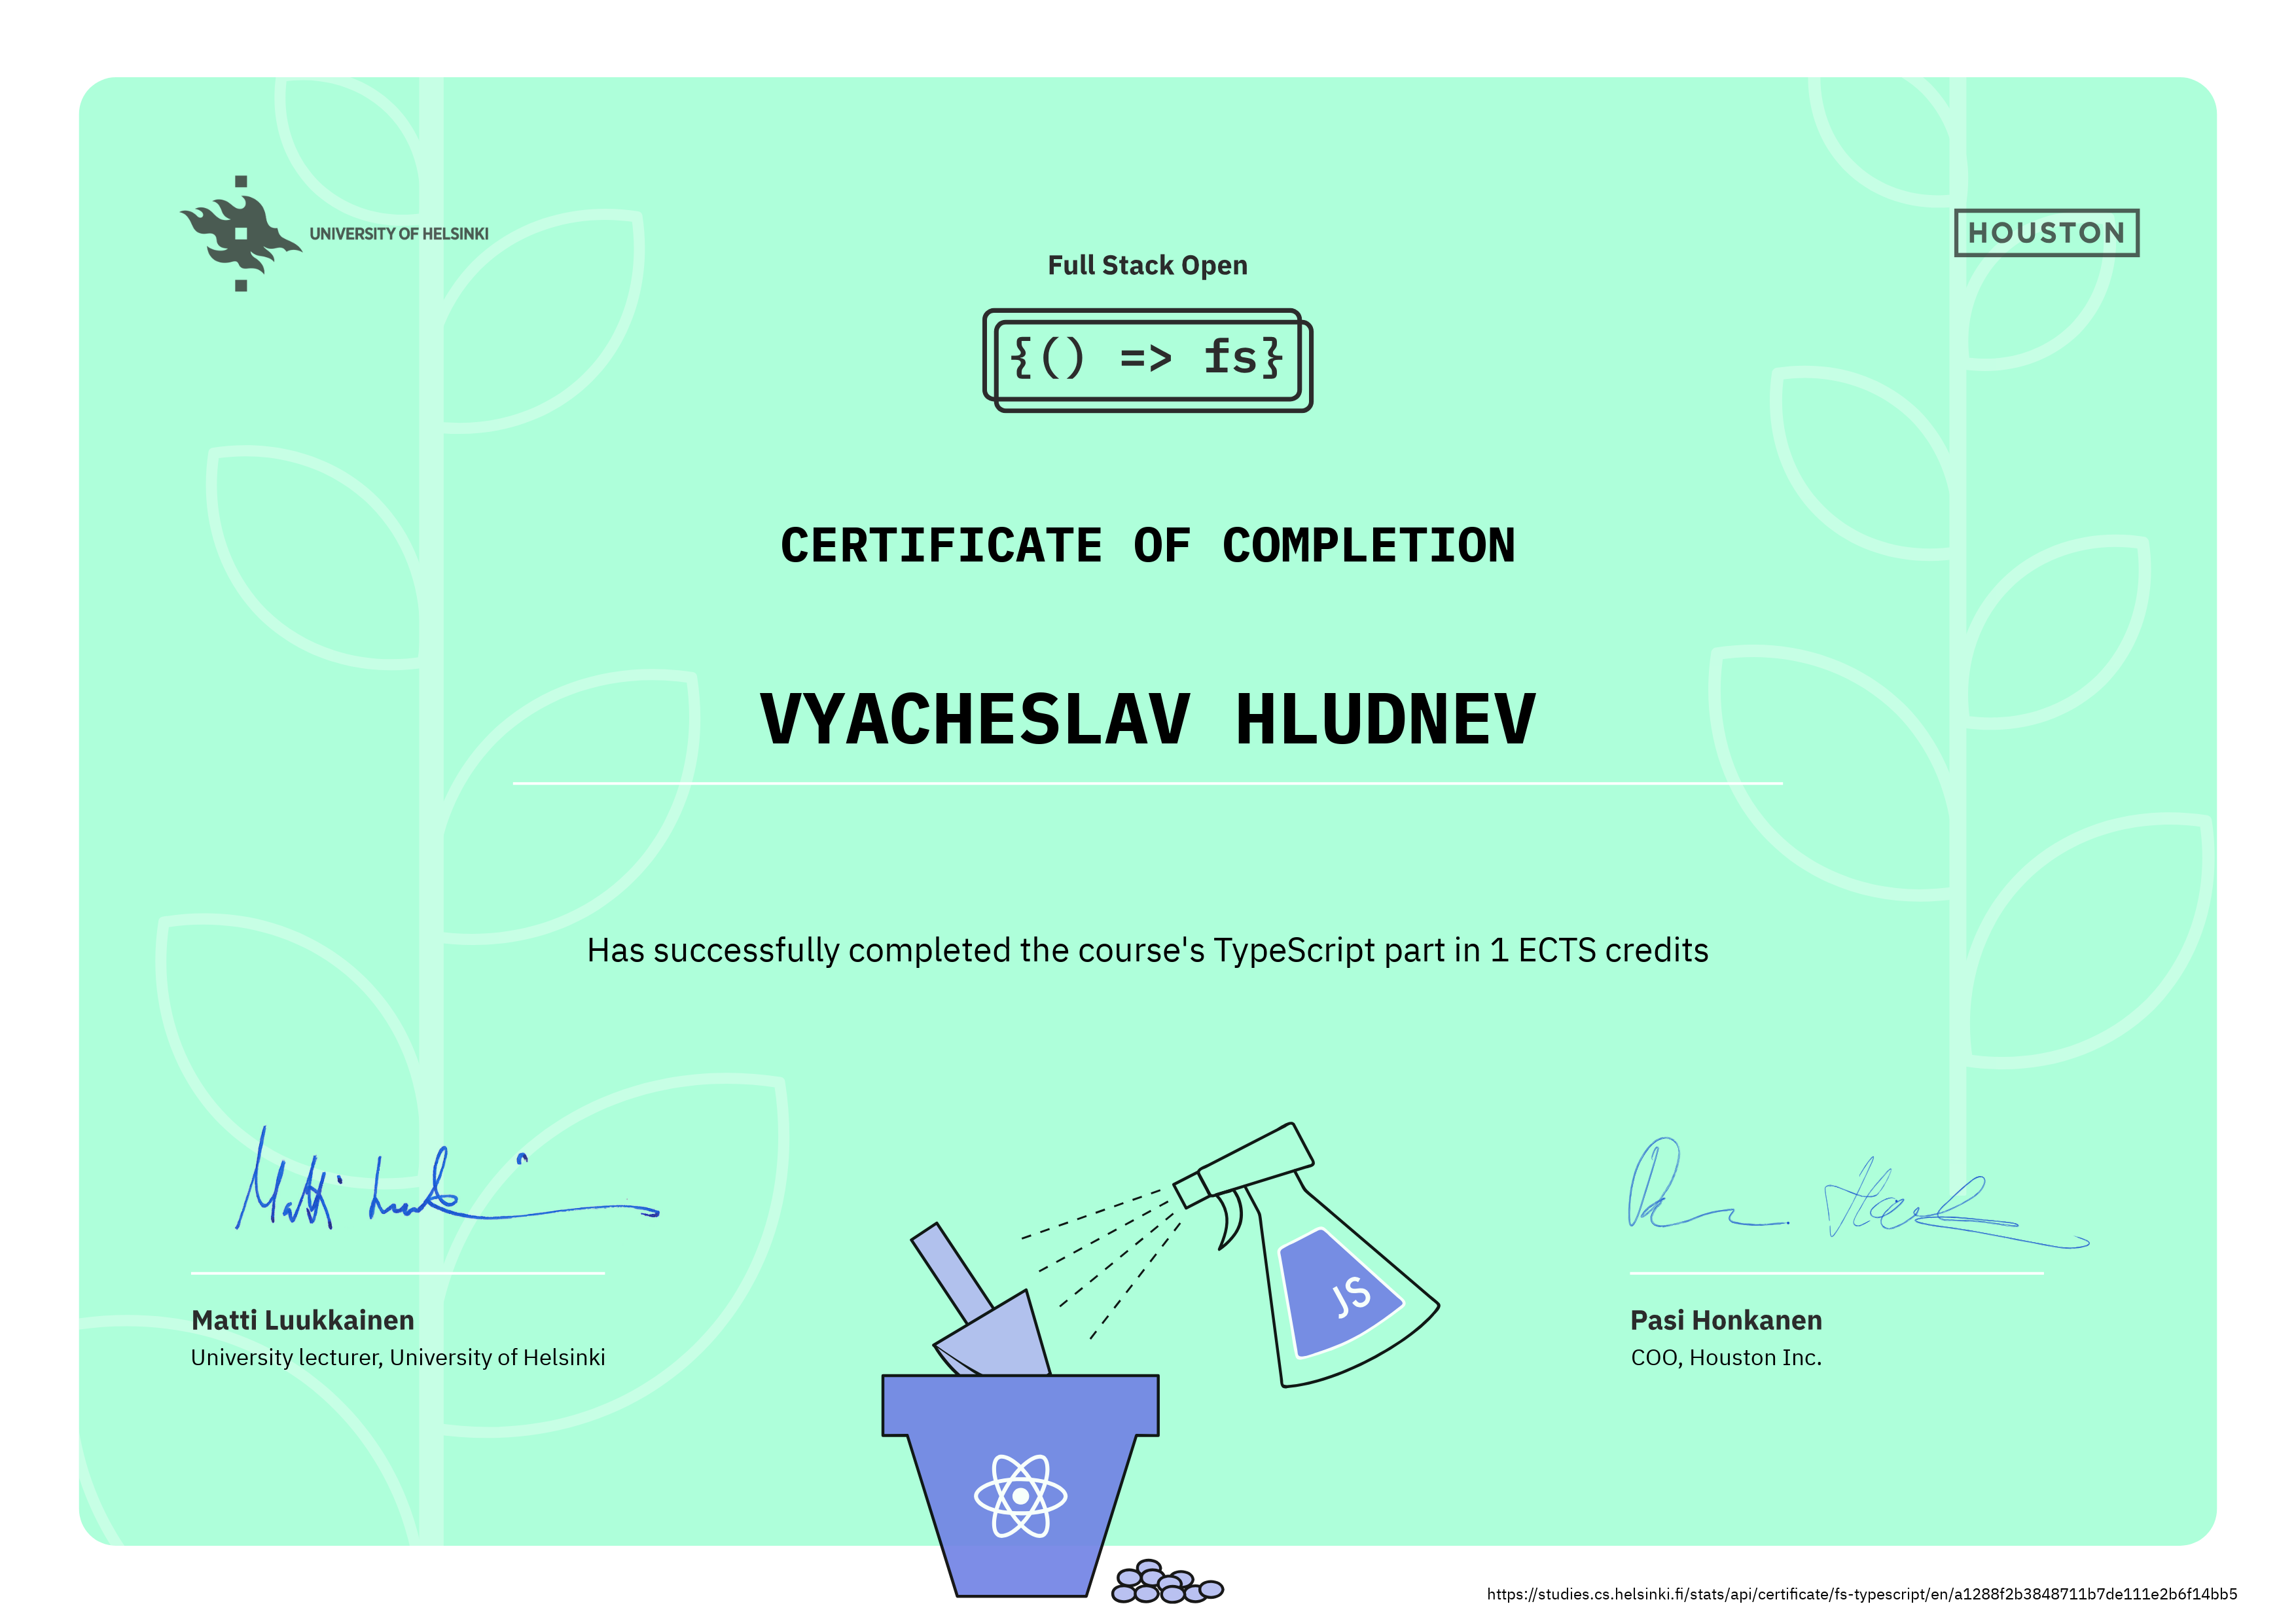 Certificate of Completion, FullStack Open Typescrypt, with 1 credit, code a1288f2b3848711b7de111e2b6f14bb5